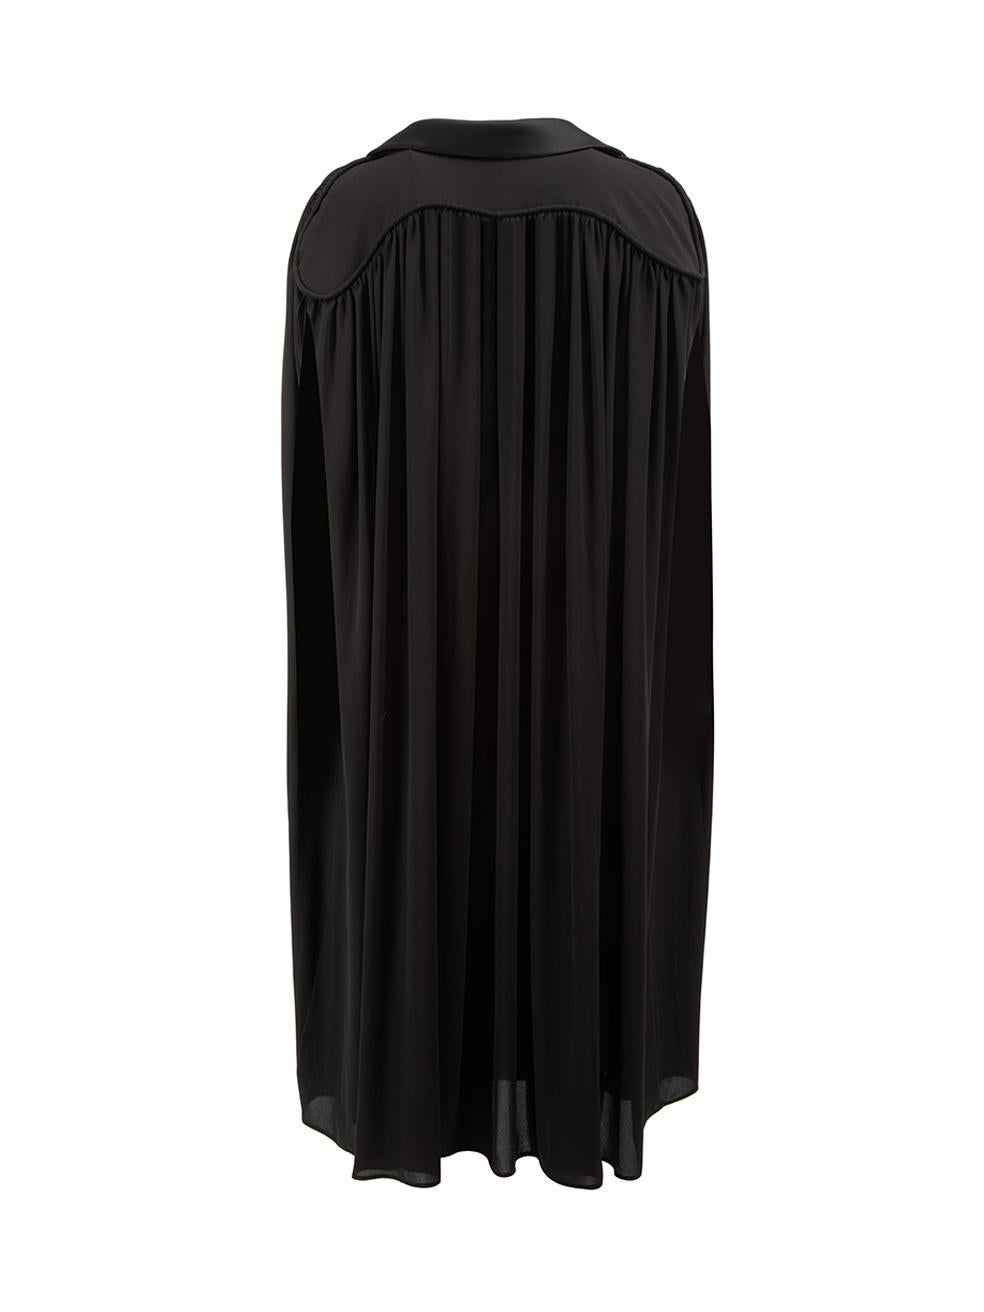 Maison Rabih Keyrouz Women's Black Belted Long Cape In Good Condition For Sale In London, GB